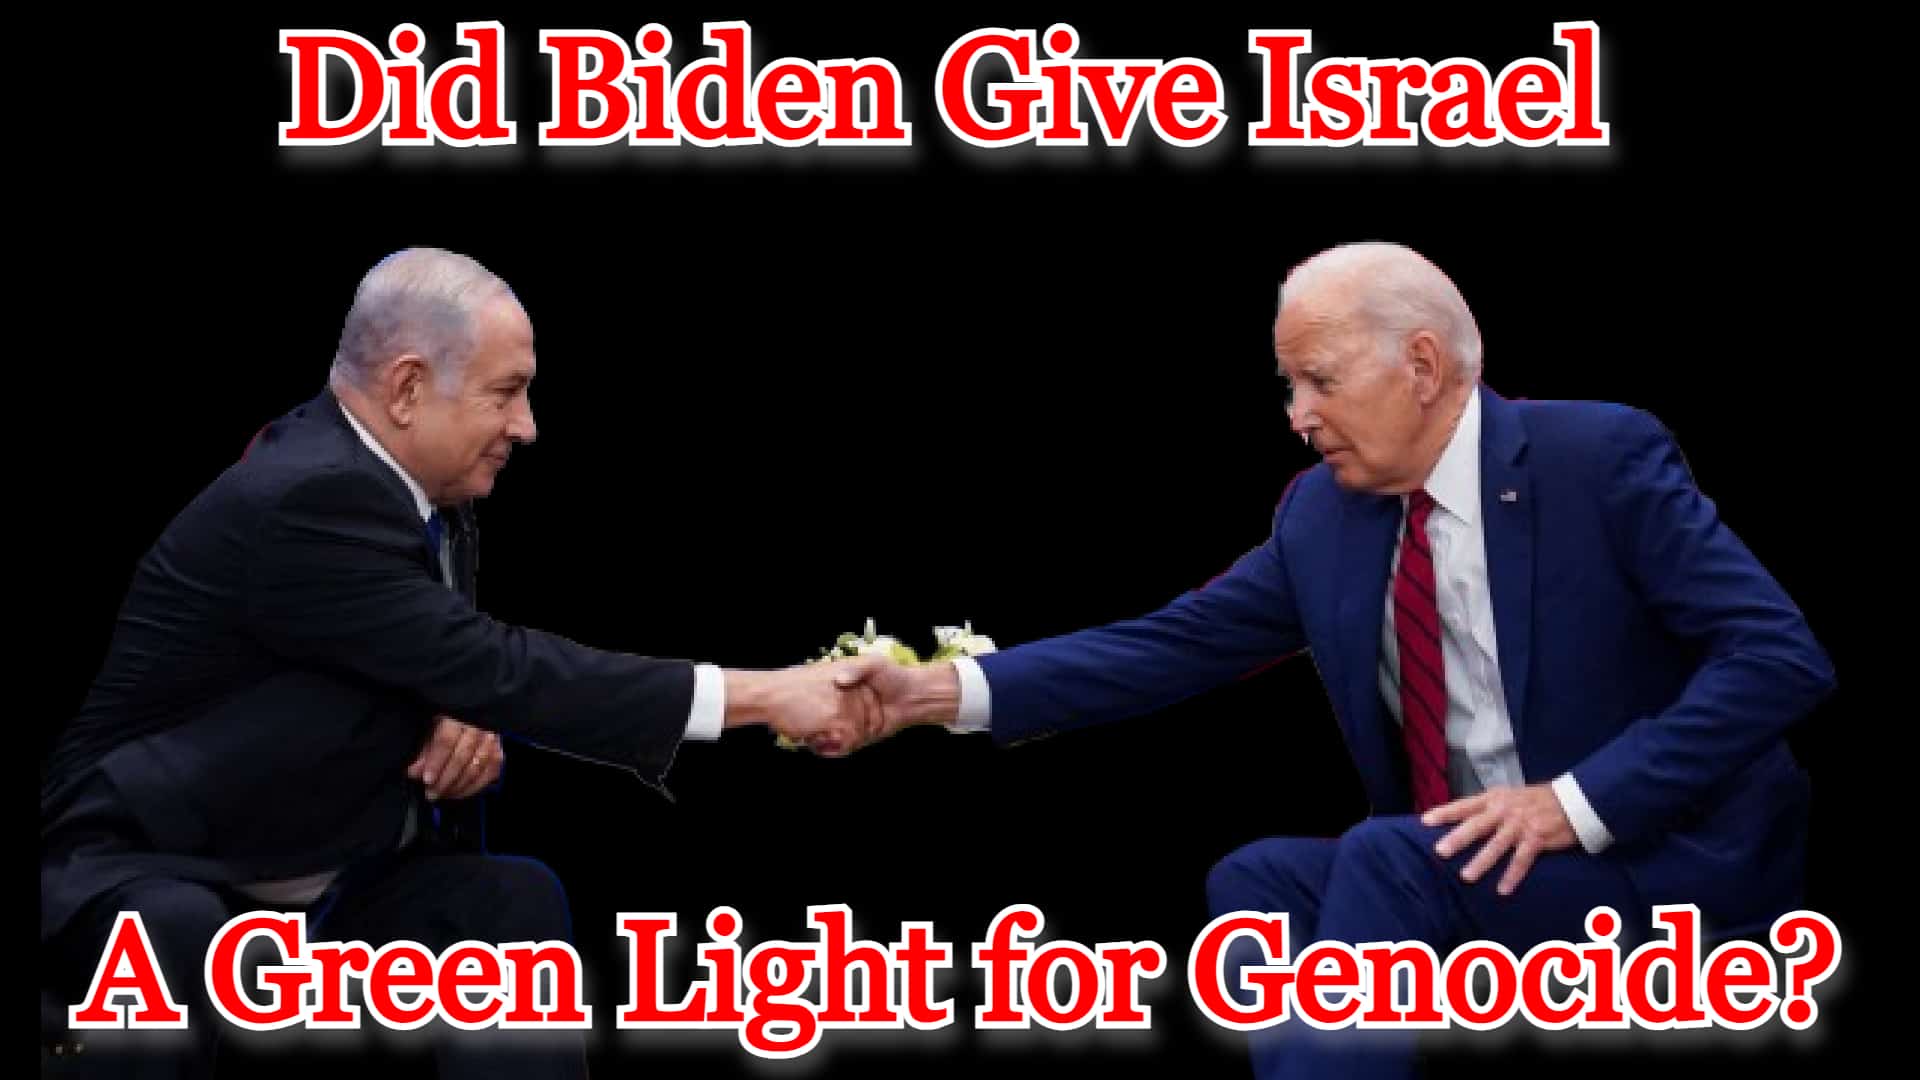 COI #510: Did Biden Give Israel a Green Light for Genocide?